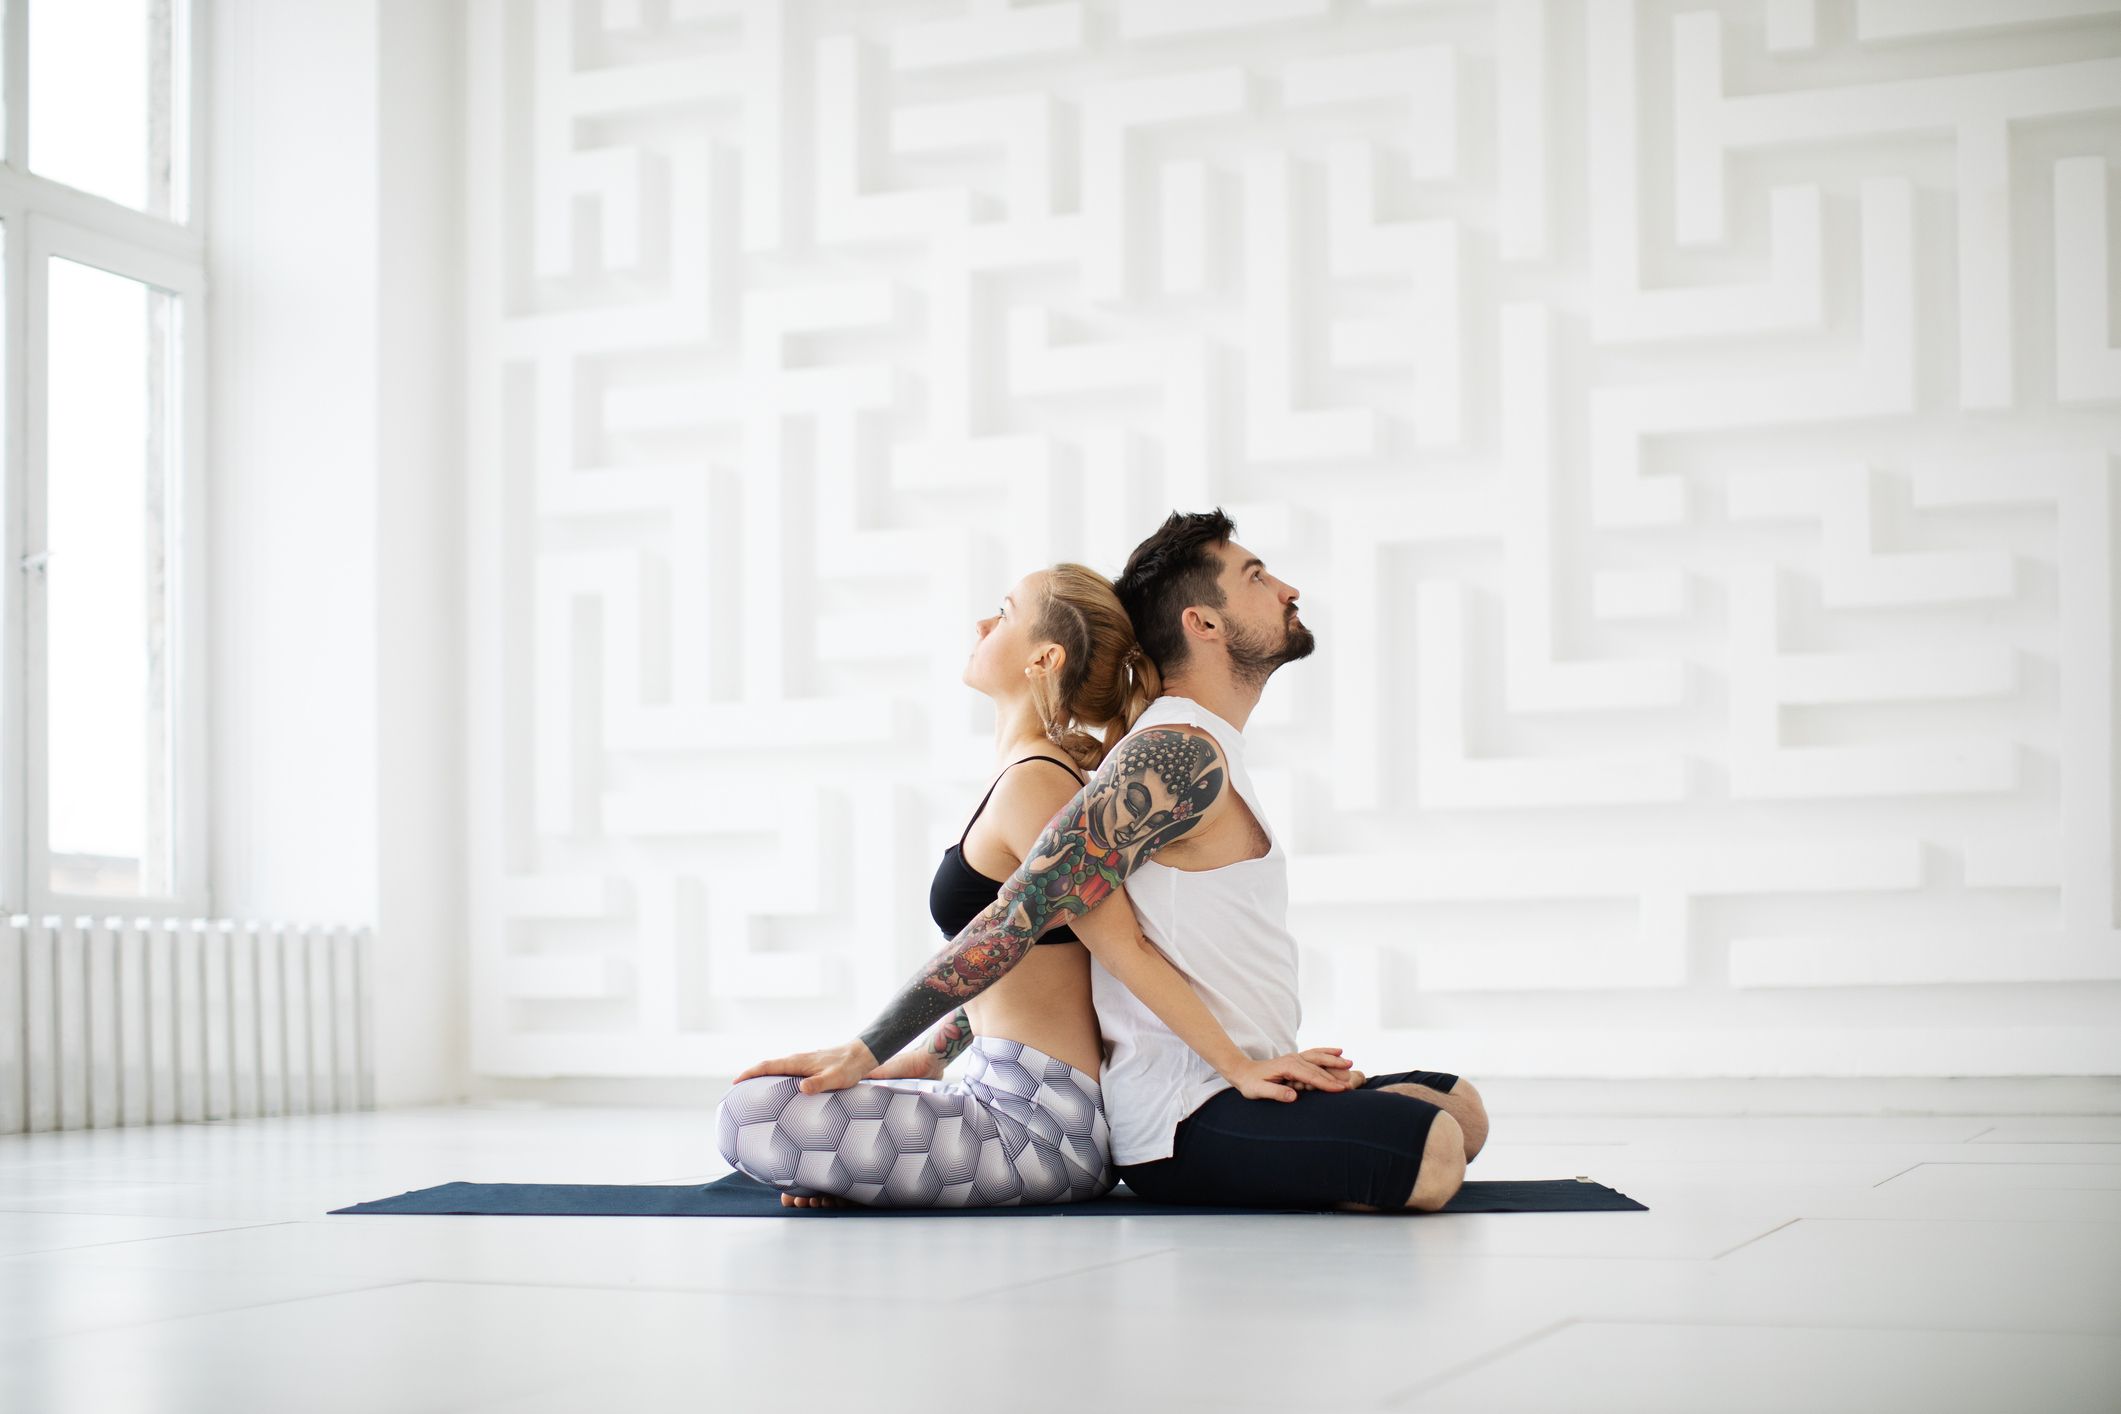 Yoga Block deepen stretches &poses improve balance & stability